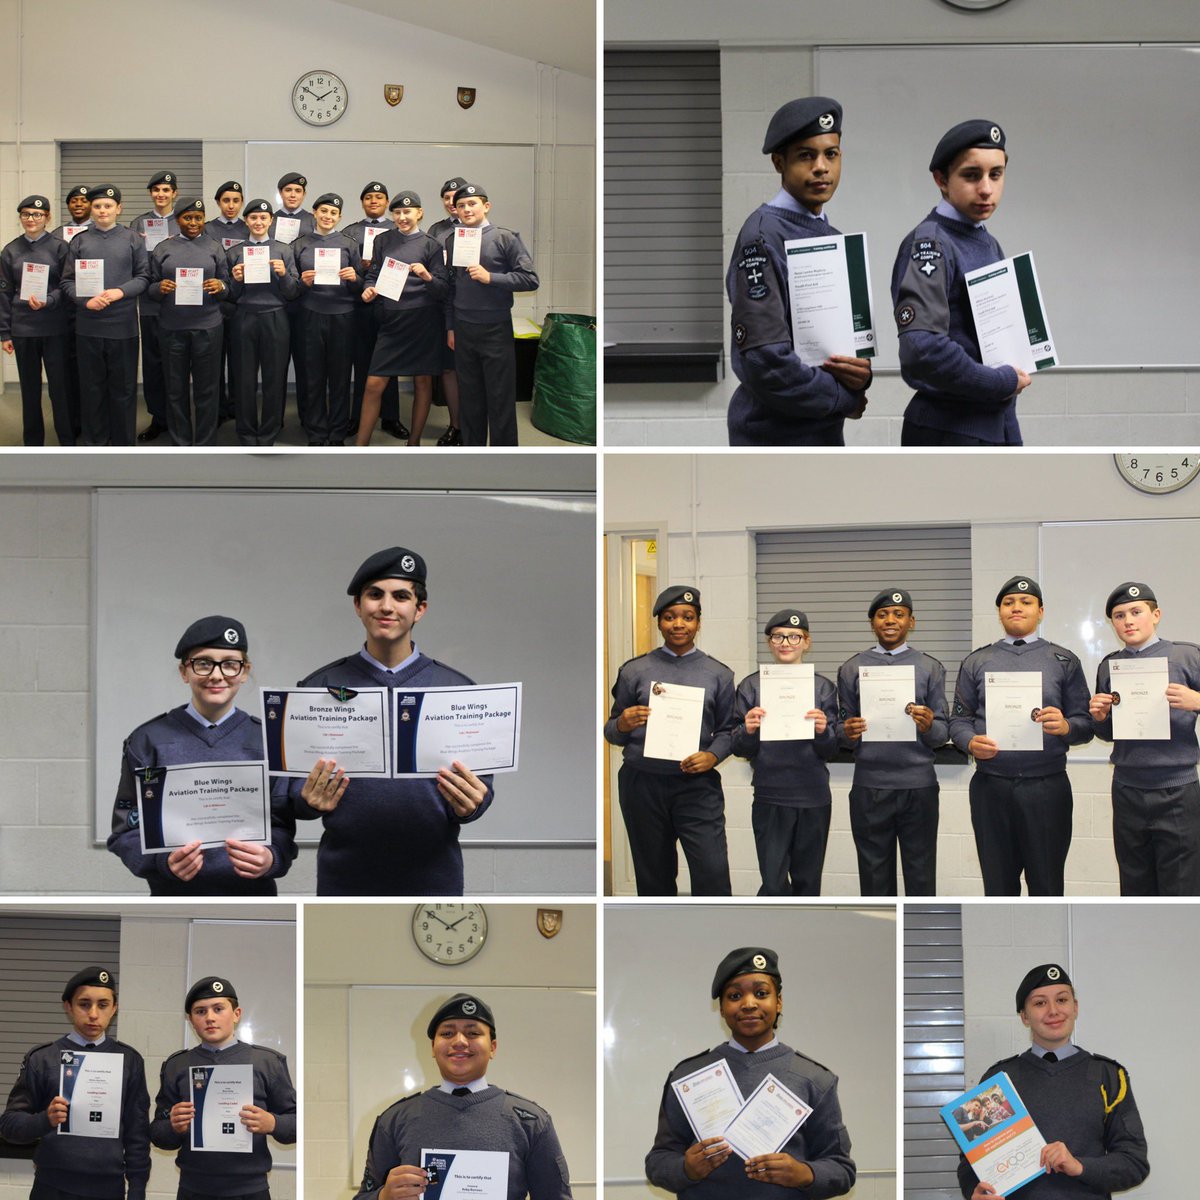 Congratulations to all cadets who were awards certificates and awards. #TEAM504 #aircadets @aircadets #WhatWeDo